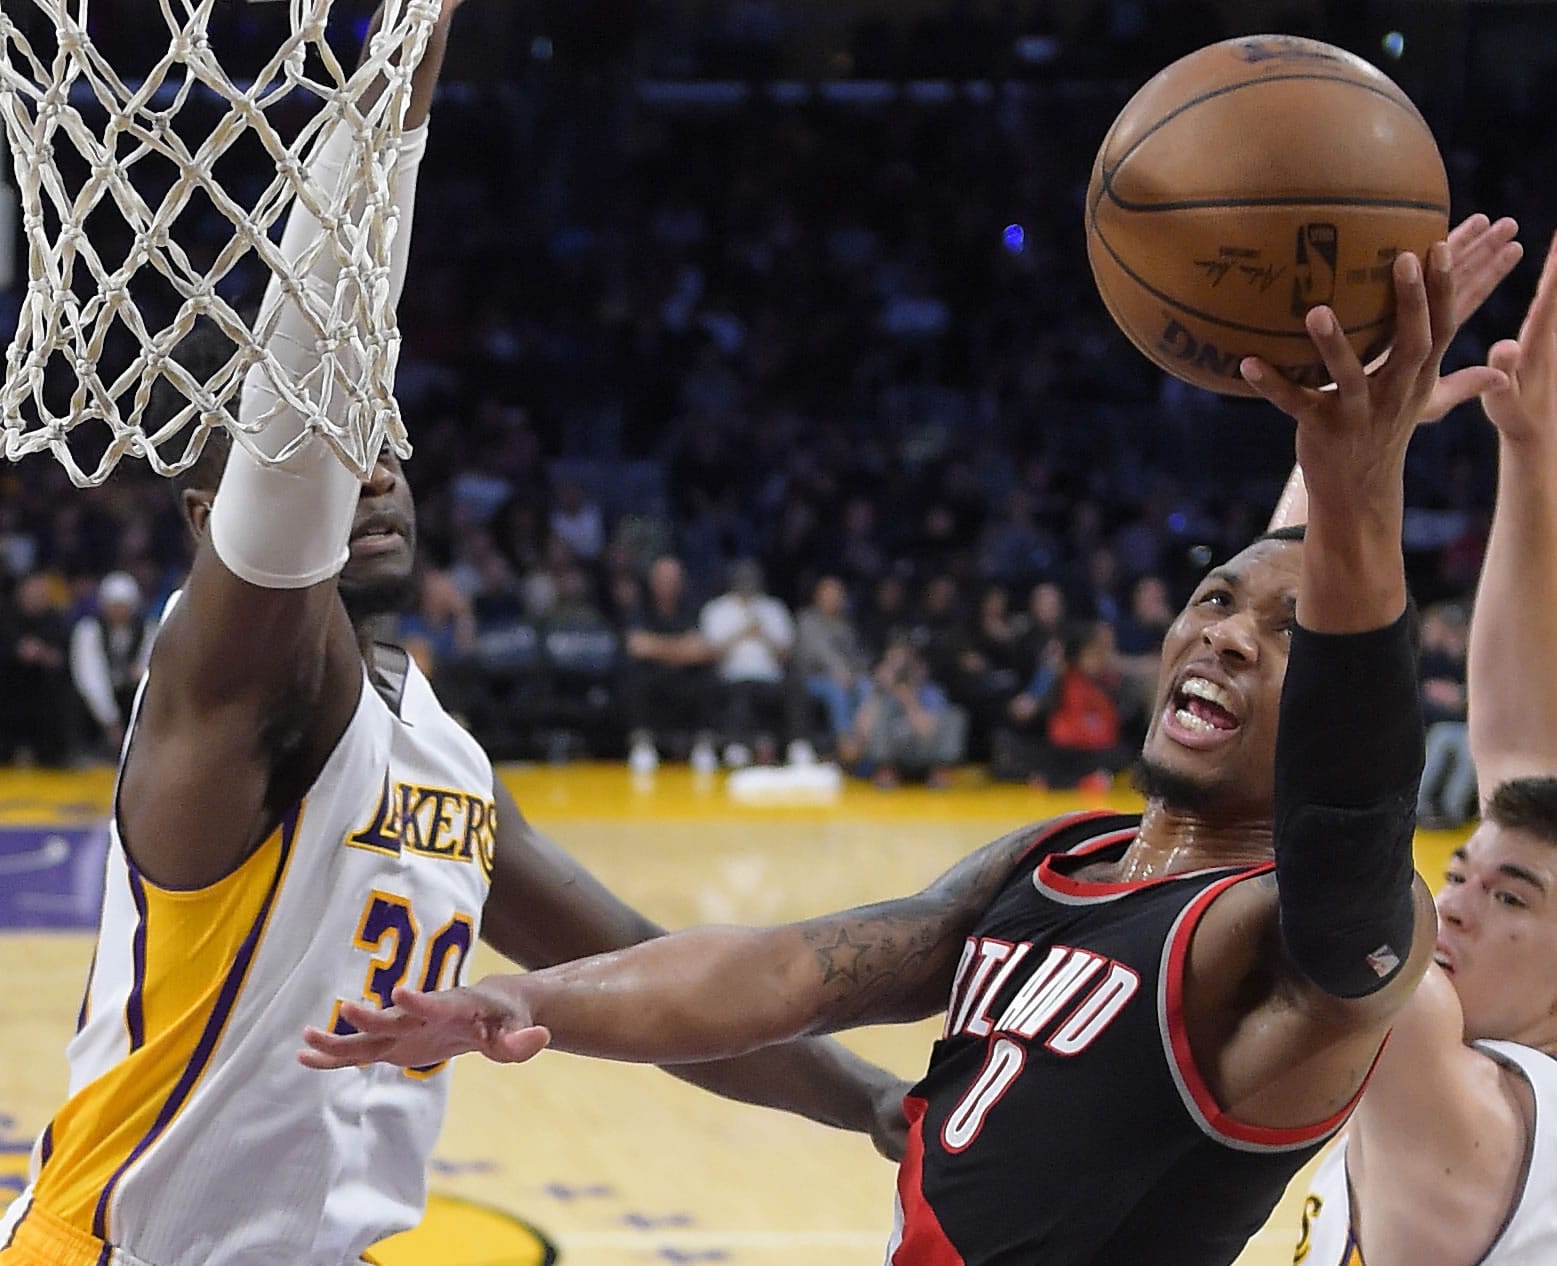 Portland Trail Blazers guard Damian Lillard, right, shoots as Los Angeles Lakers forward Julius Randle defends during the first half of an NBA basketball game, Sunday, March 26, 2017, in Los Angeles. (AP Photo/Mark J.